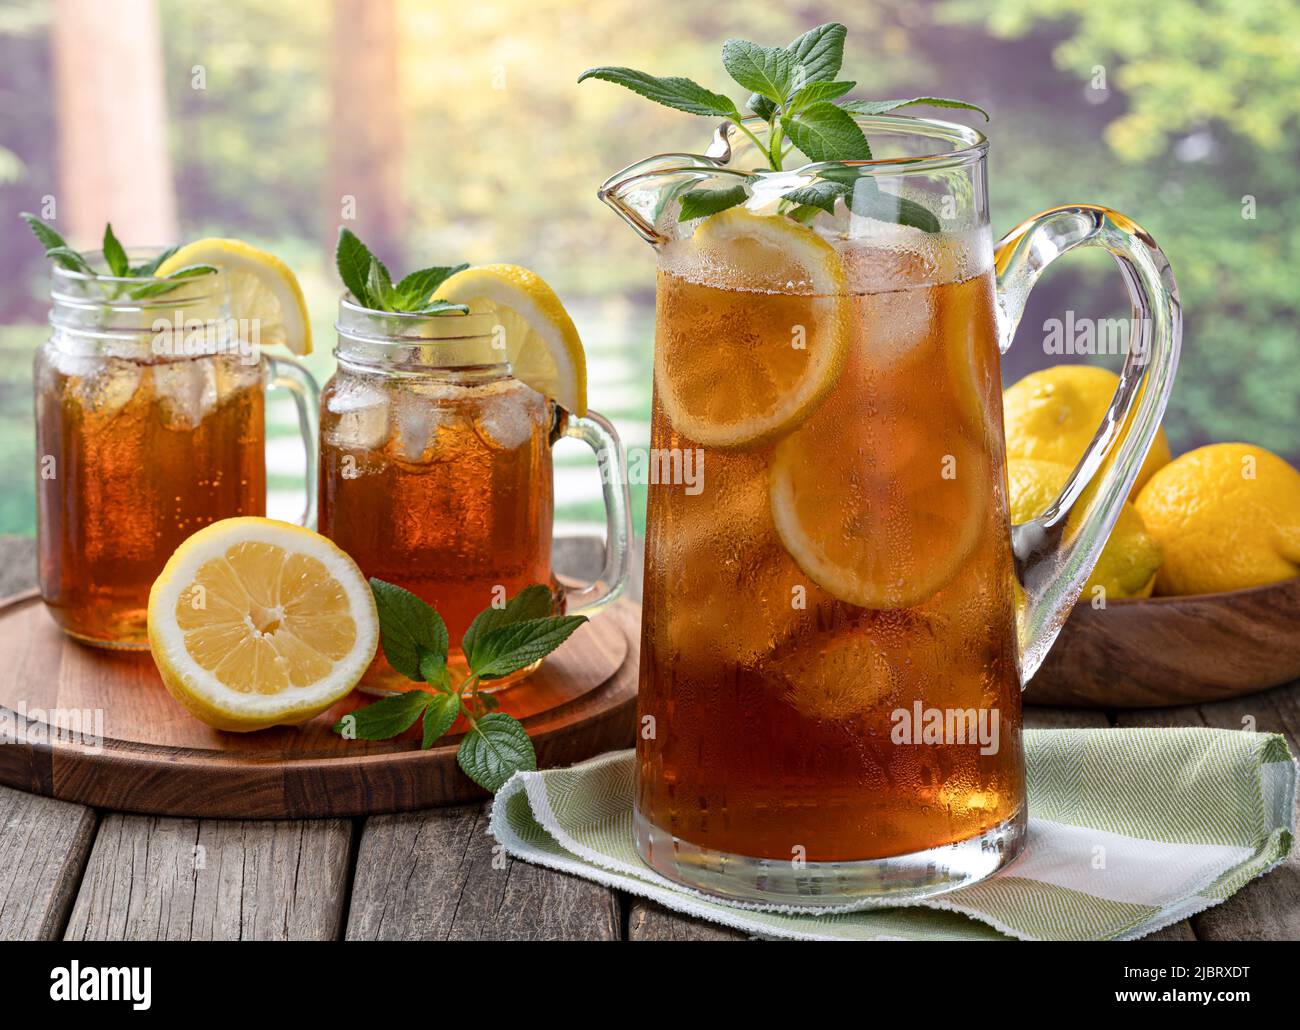 https://c8.alamy.com/comp/2JBRXDT/pitcher-of-cold-iced-tea-with-mint-lemon-slices-and-ice-with-two-glasses-ot-tea-on-a-wooden-table-and-rural-summer-background-2JBRXDT.jpg